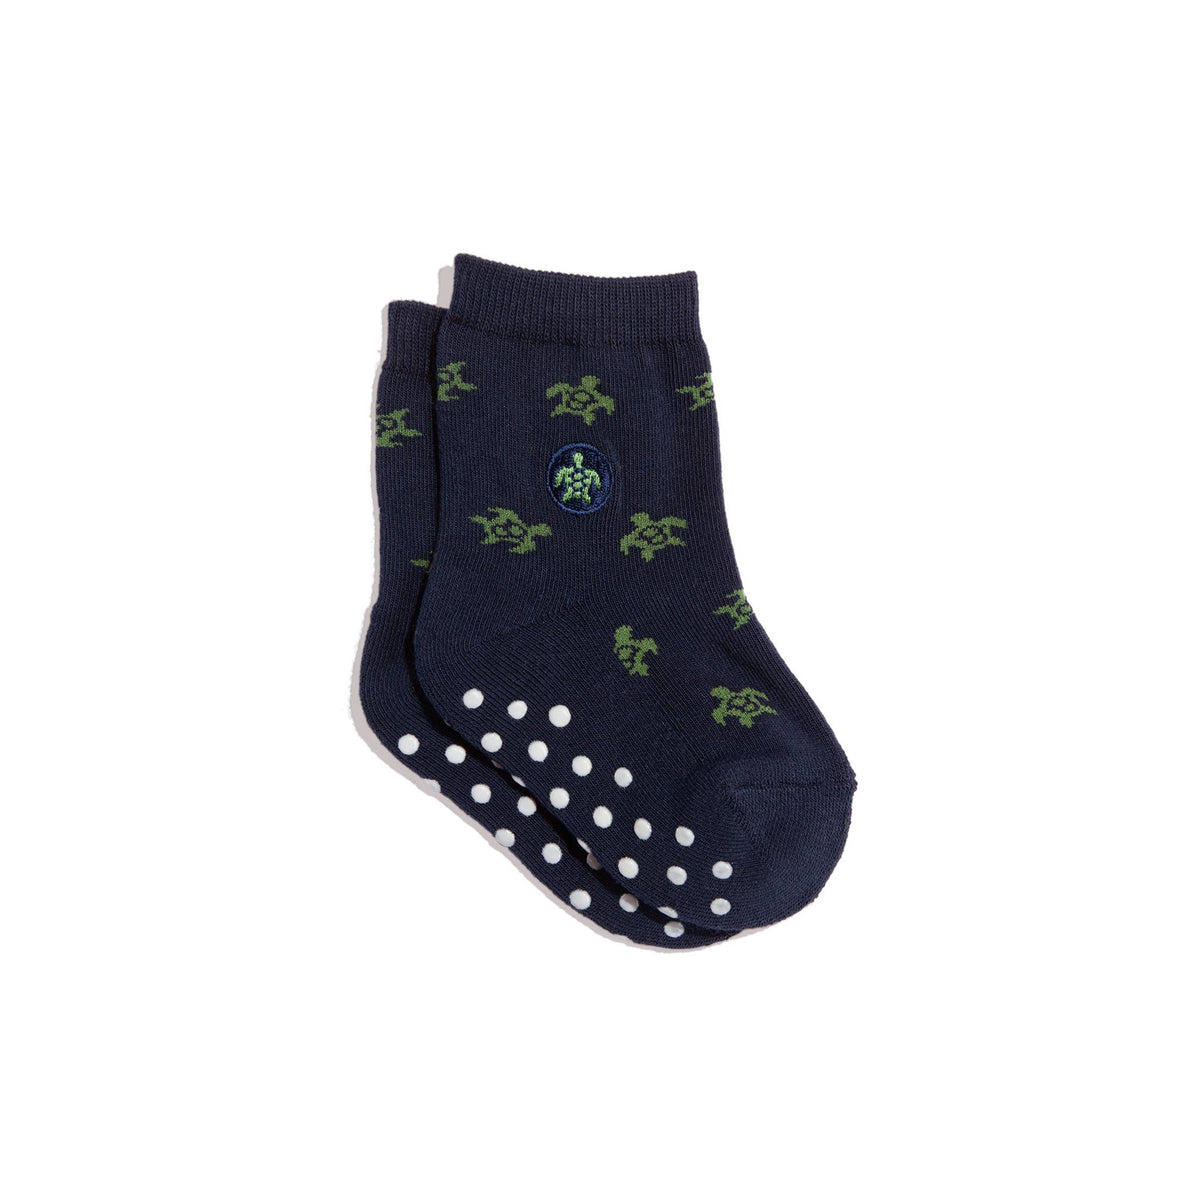 Conscious Step - Kids Socks that Protect Turtles